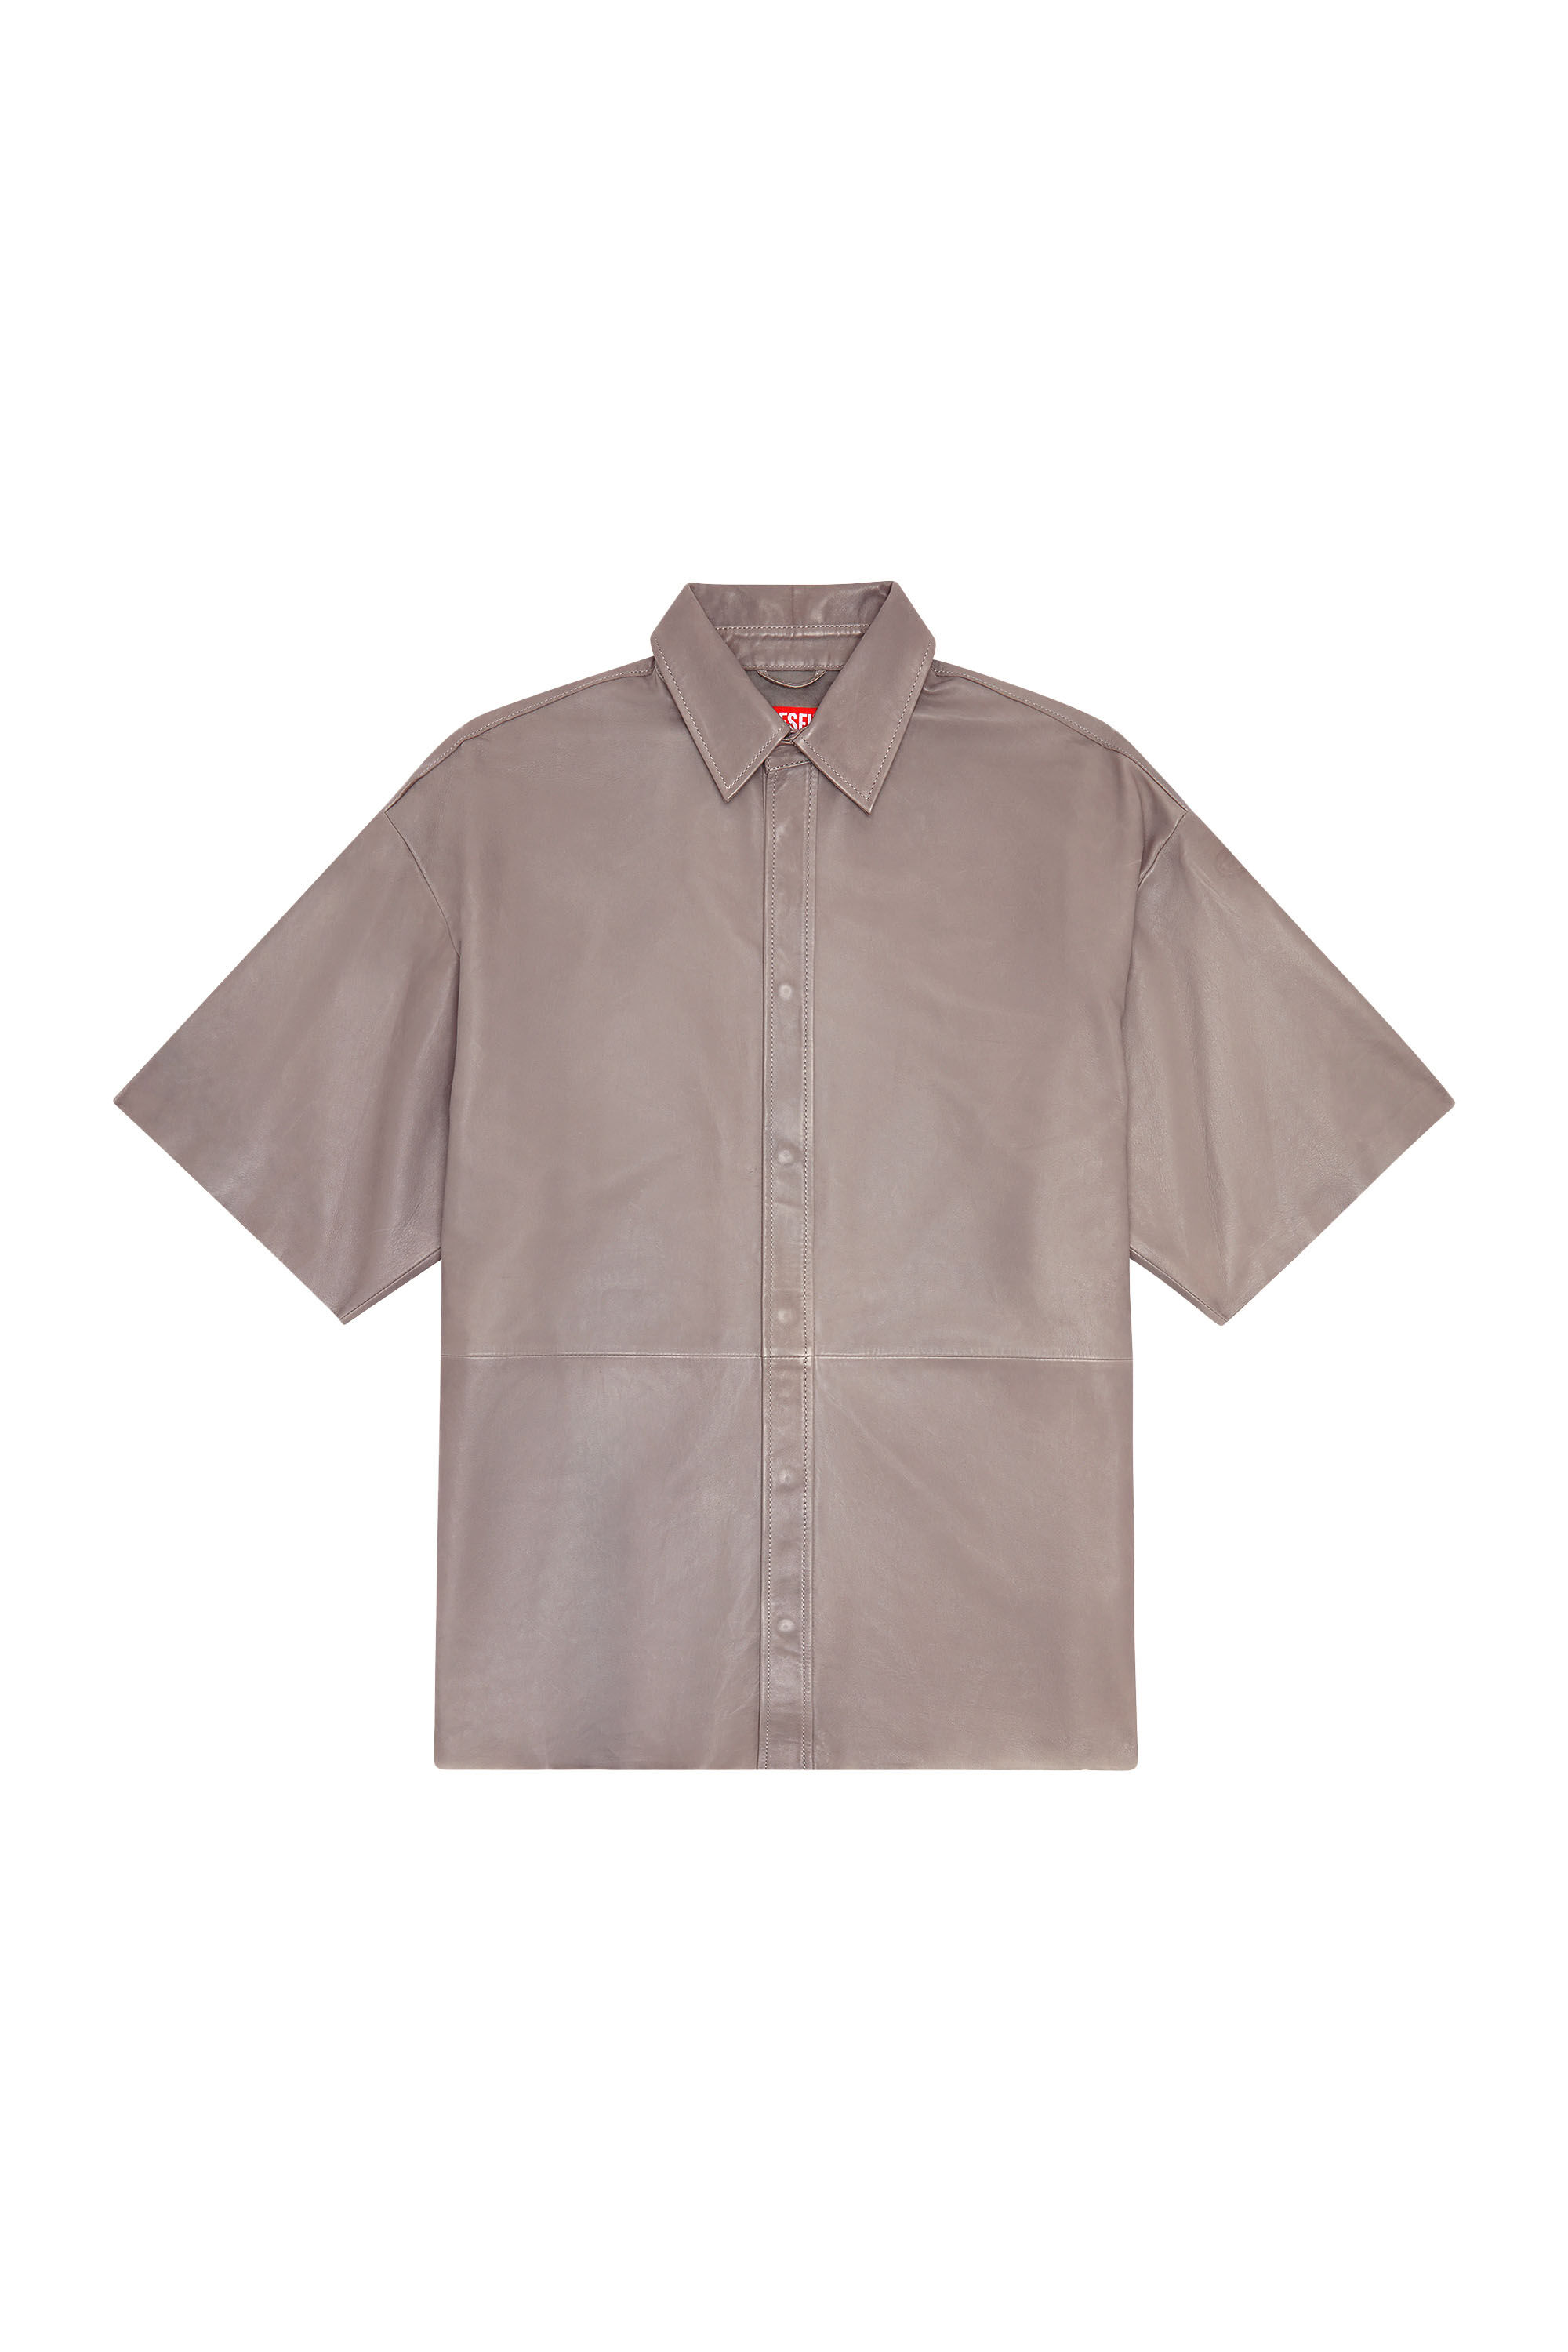 Diesel - S-EMIN-LTH, Man Oversized shirt in treated leather in Grey - Image 2